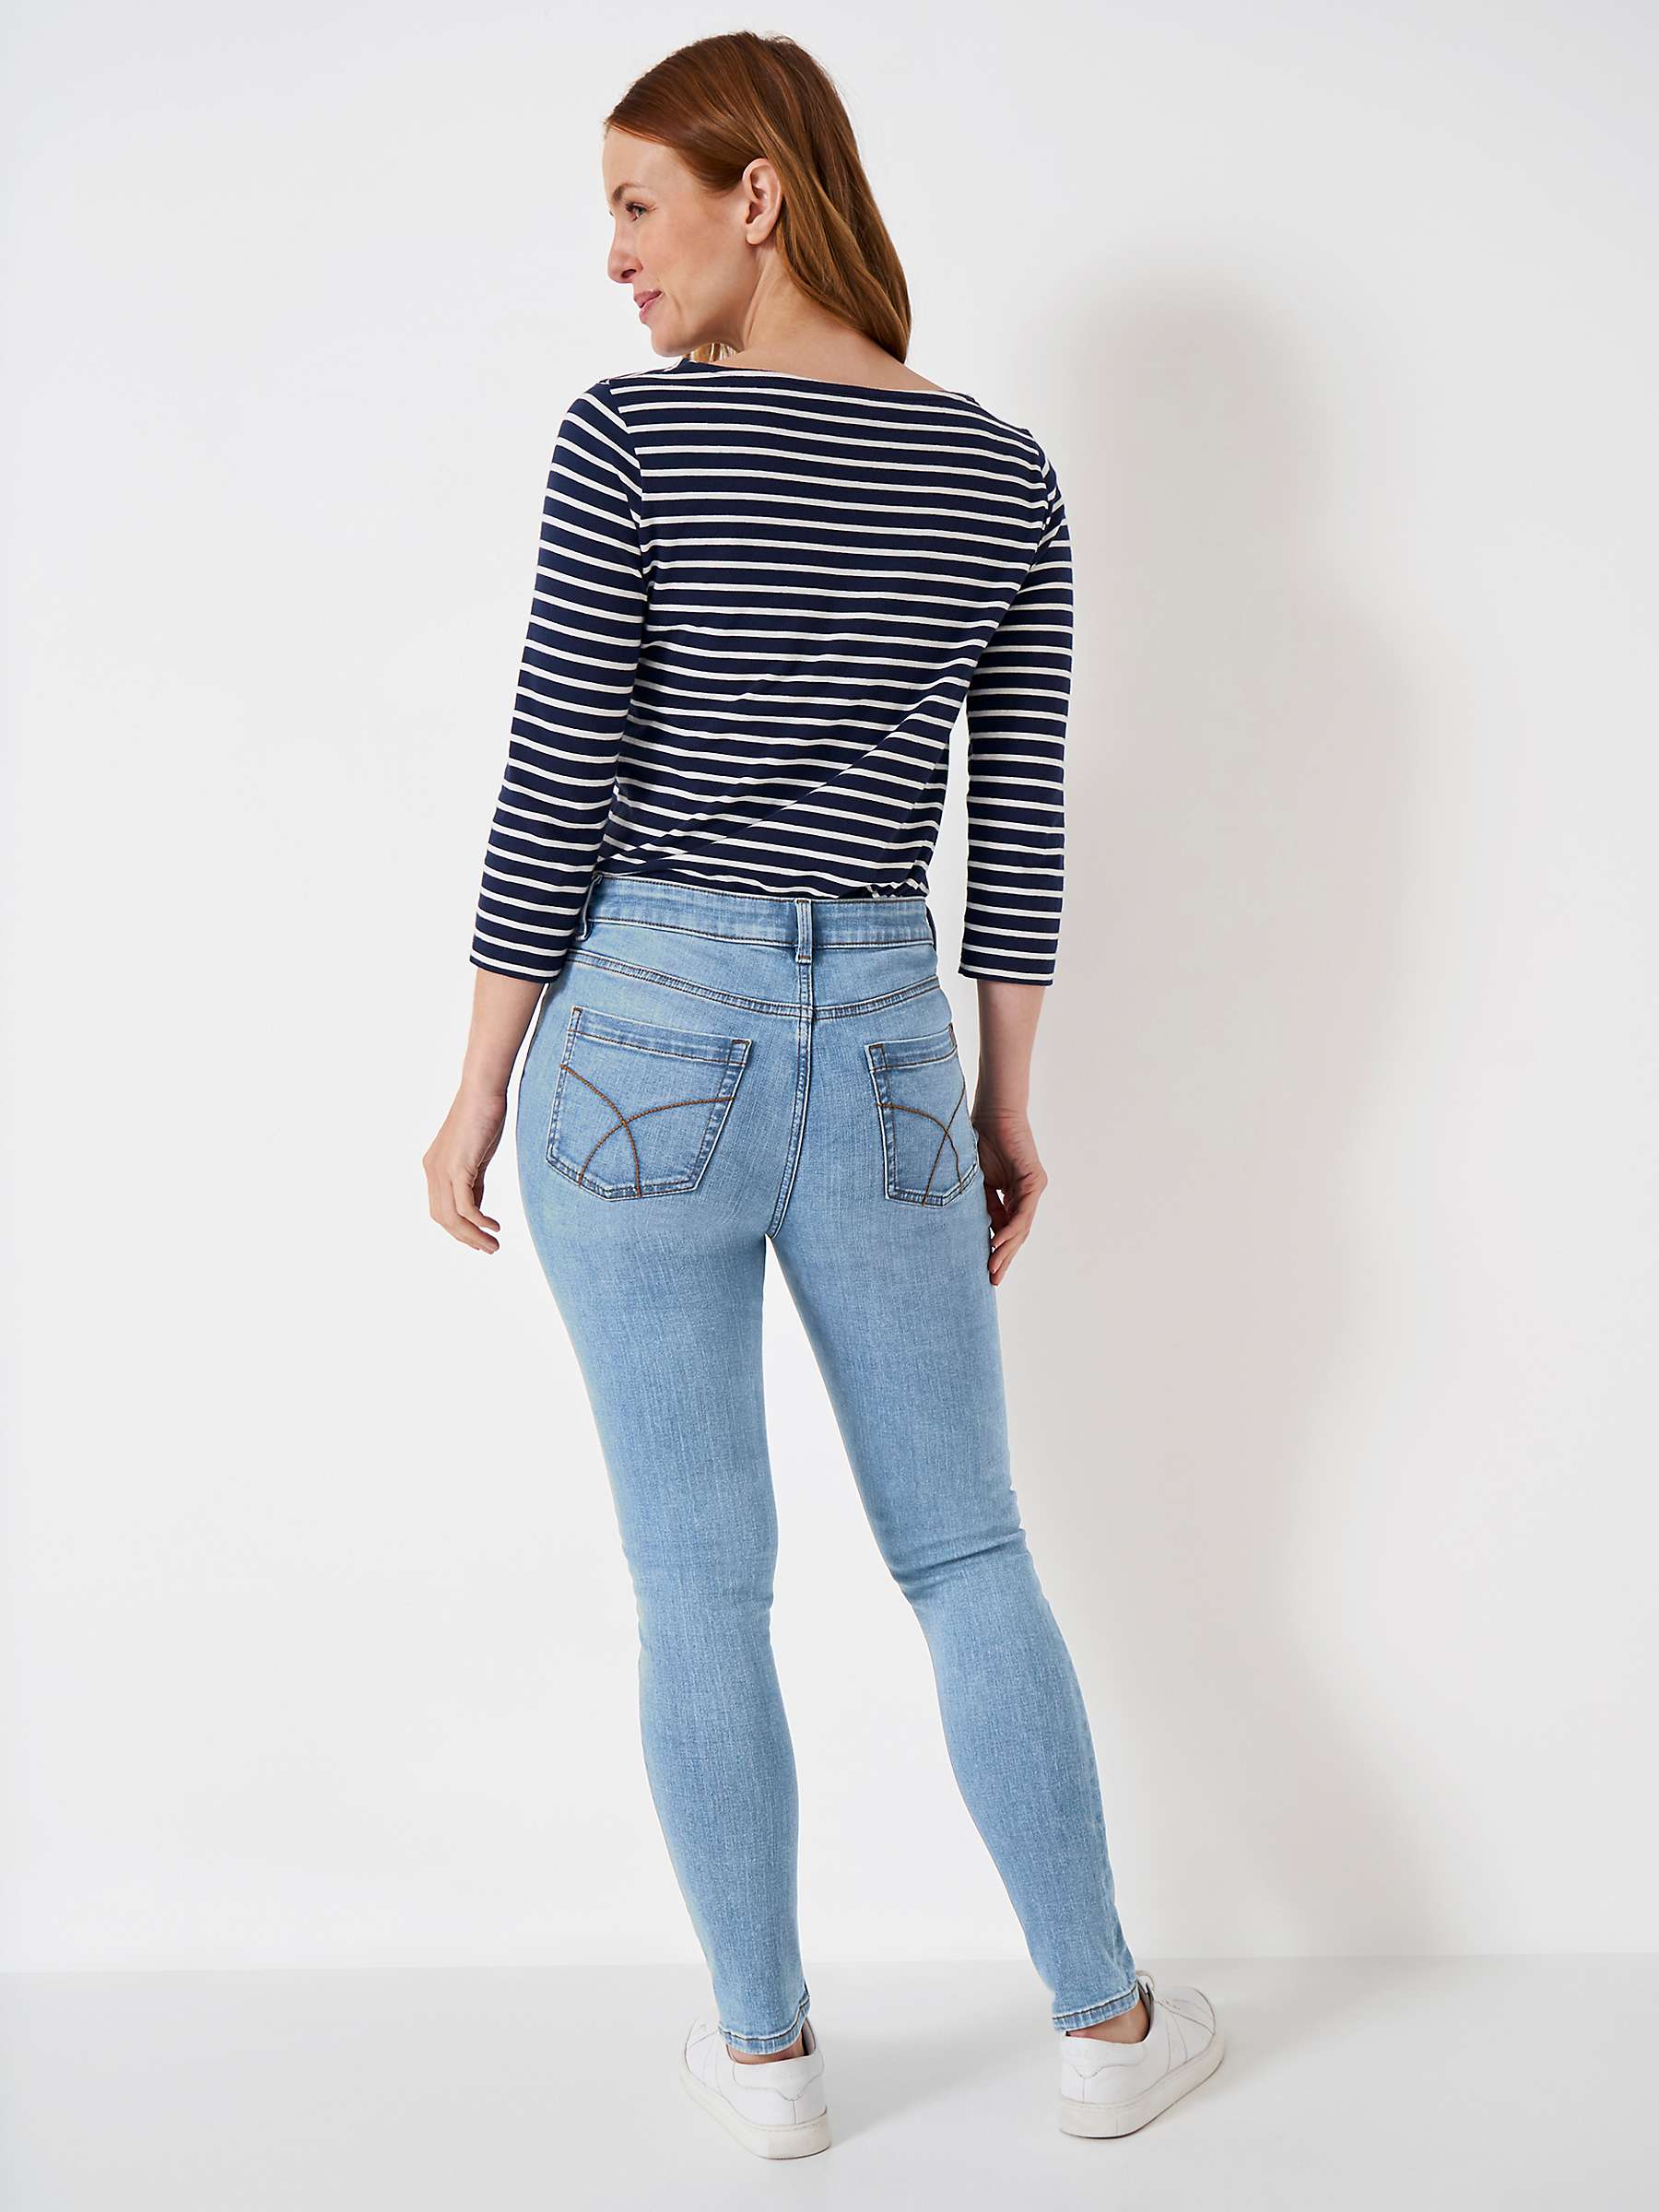 Buy Crew Clothing Skinny Jeans Online at johnlewis.com